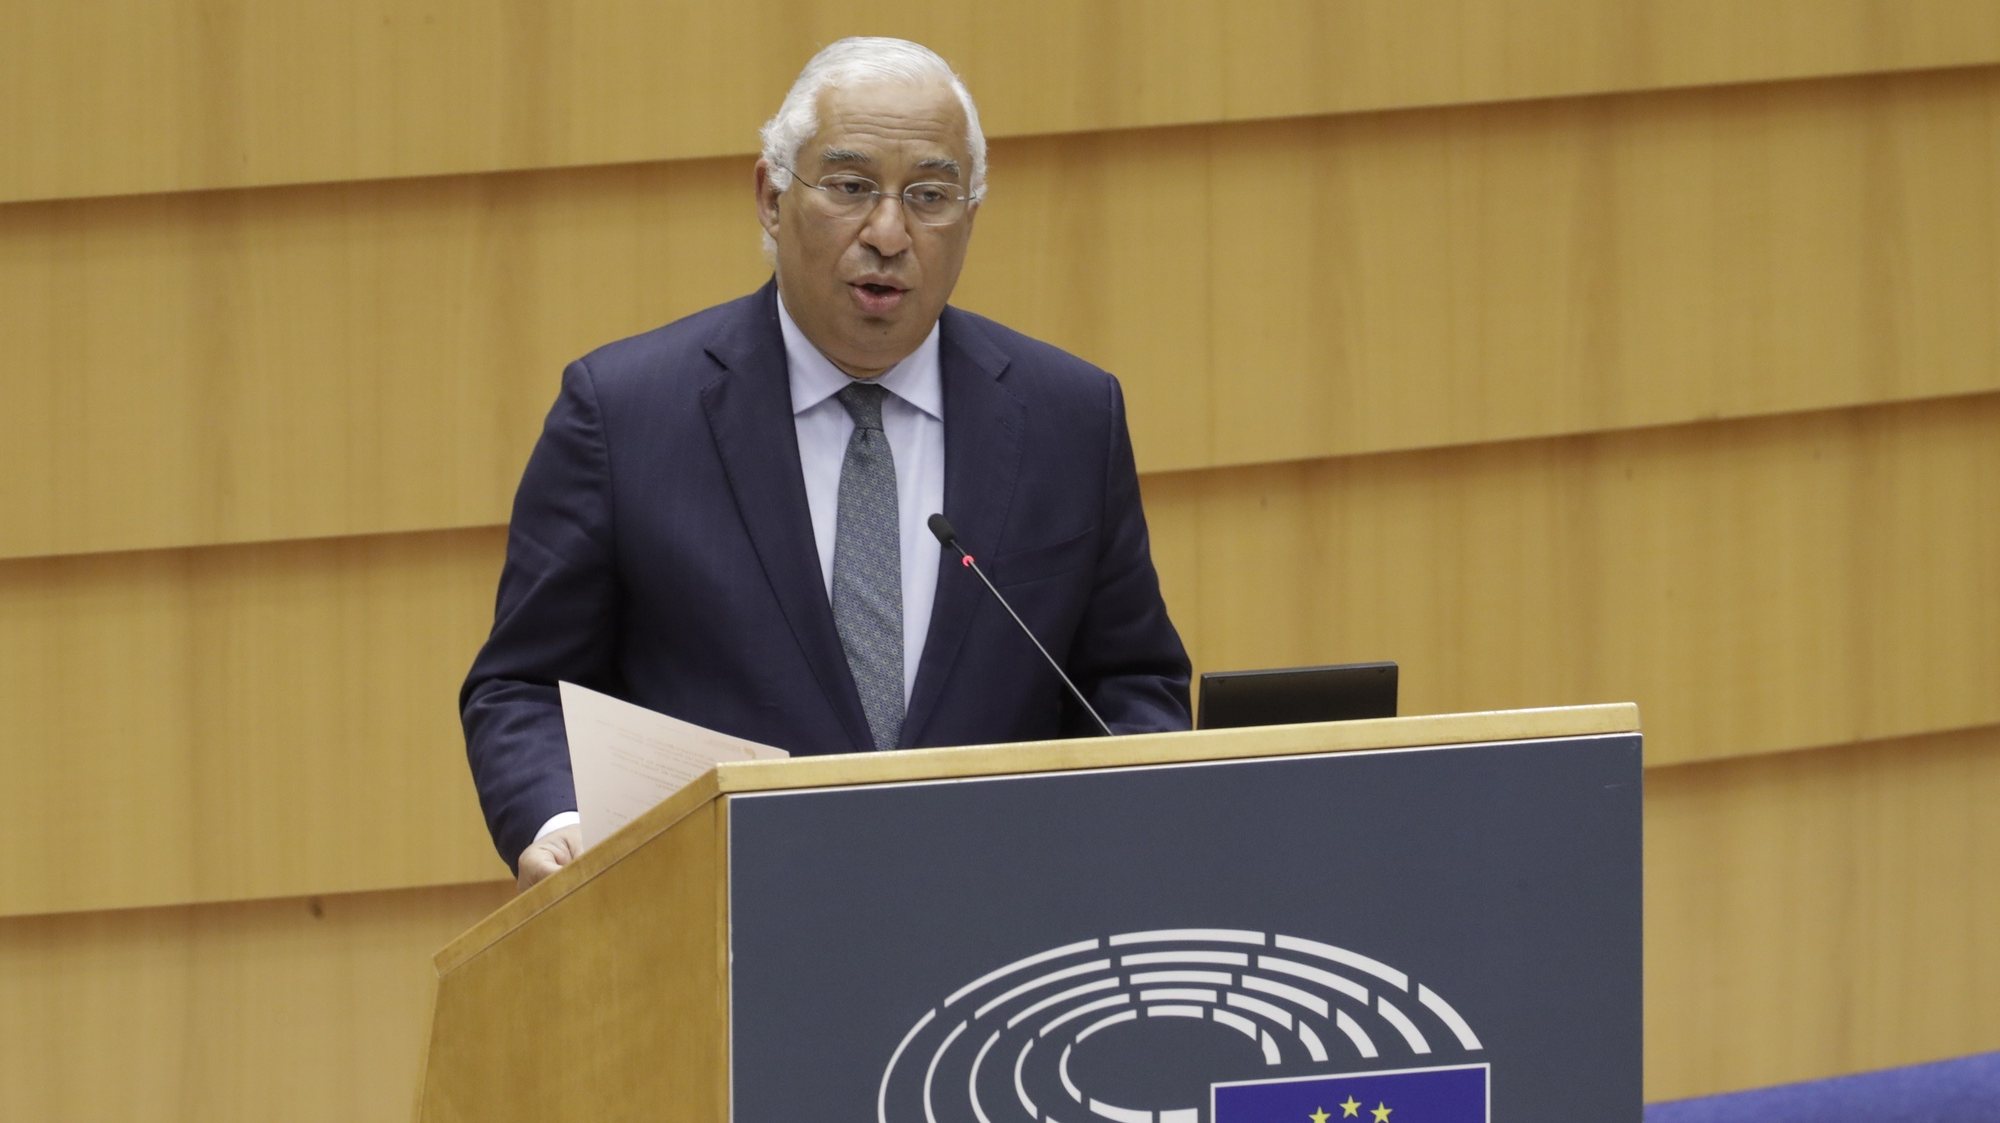 epa08950929 Portuguese Prime Minister Antonio Costa speaks during debate to present the programme of activities of the Portuguese presidency of the EU at plenary session of the European Parliament, in Brussels, Belgium, 20 January 2021.  EPA/OLIVIER HOSLET